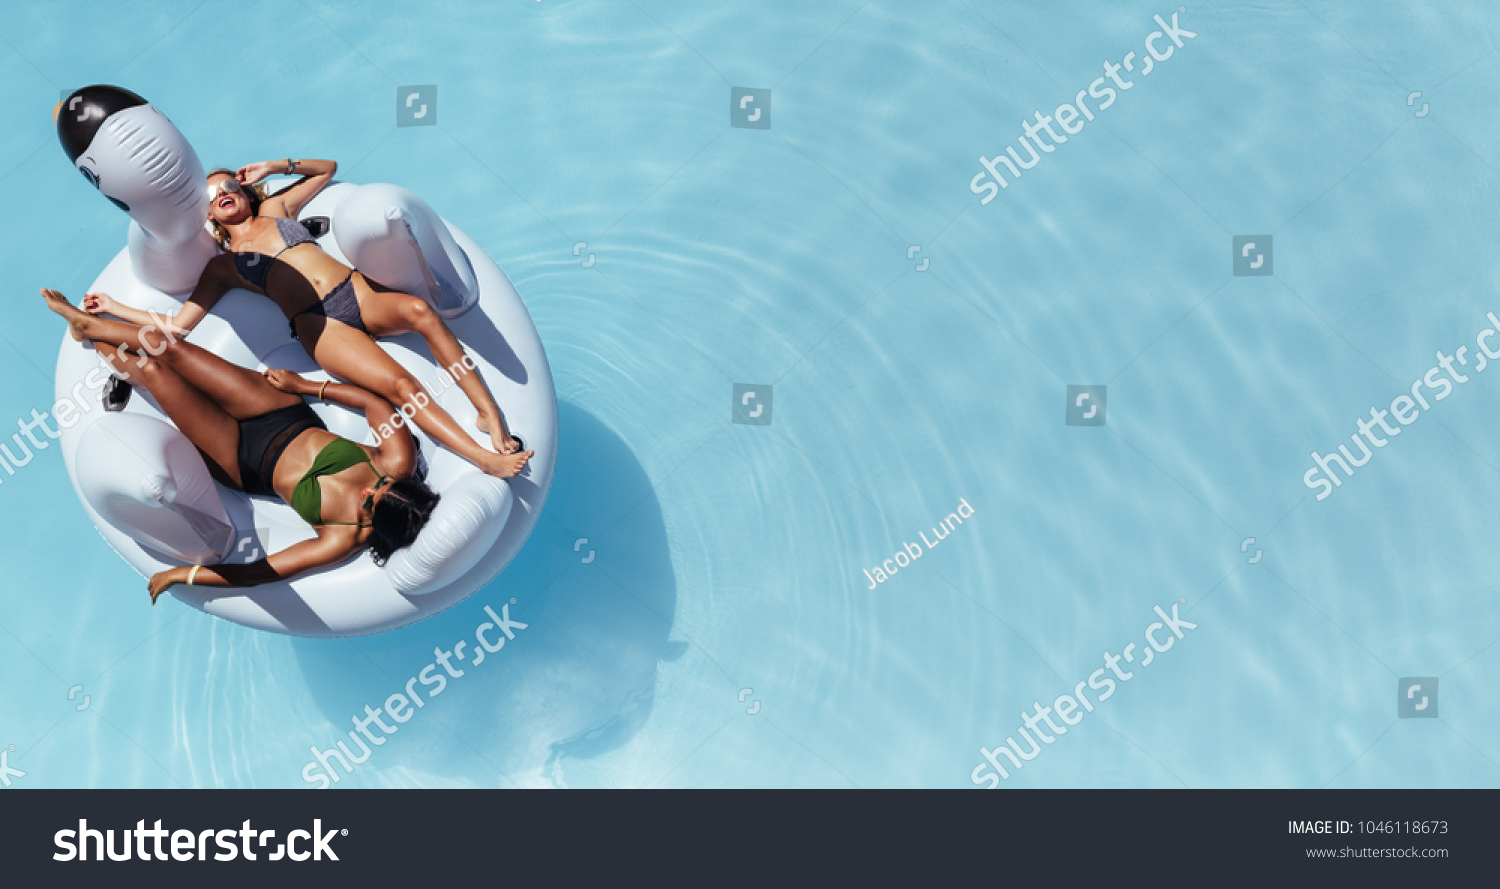 Top view of female friends wearing bikini lying on an inflatable toy in pool. Woman sunbathing on floating pool inflatable toy. #1046118673